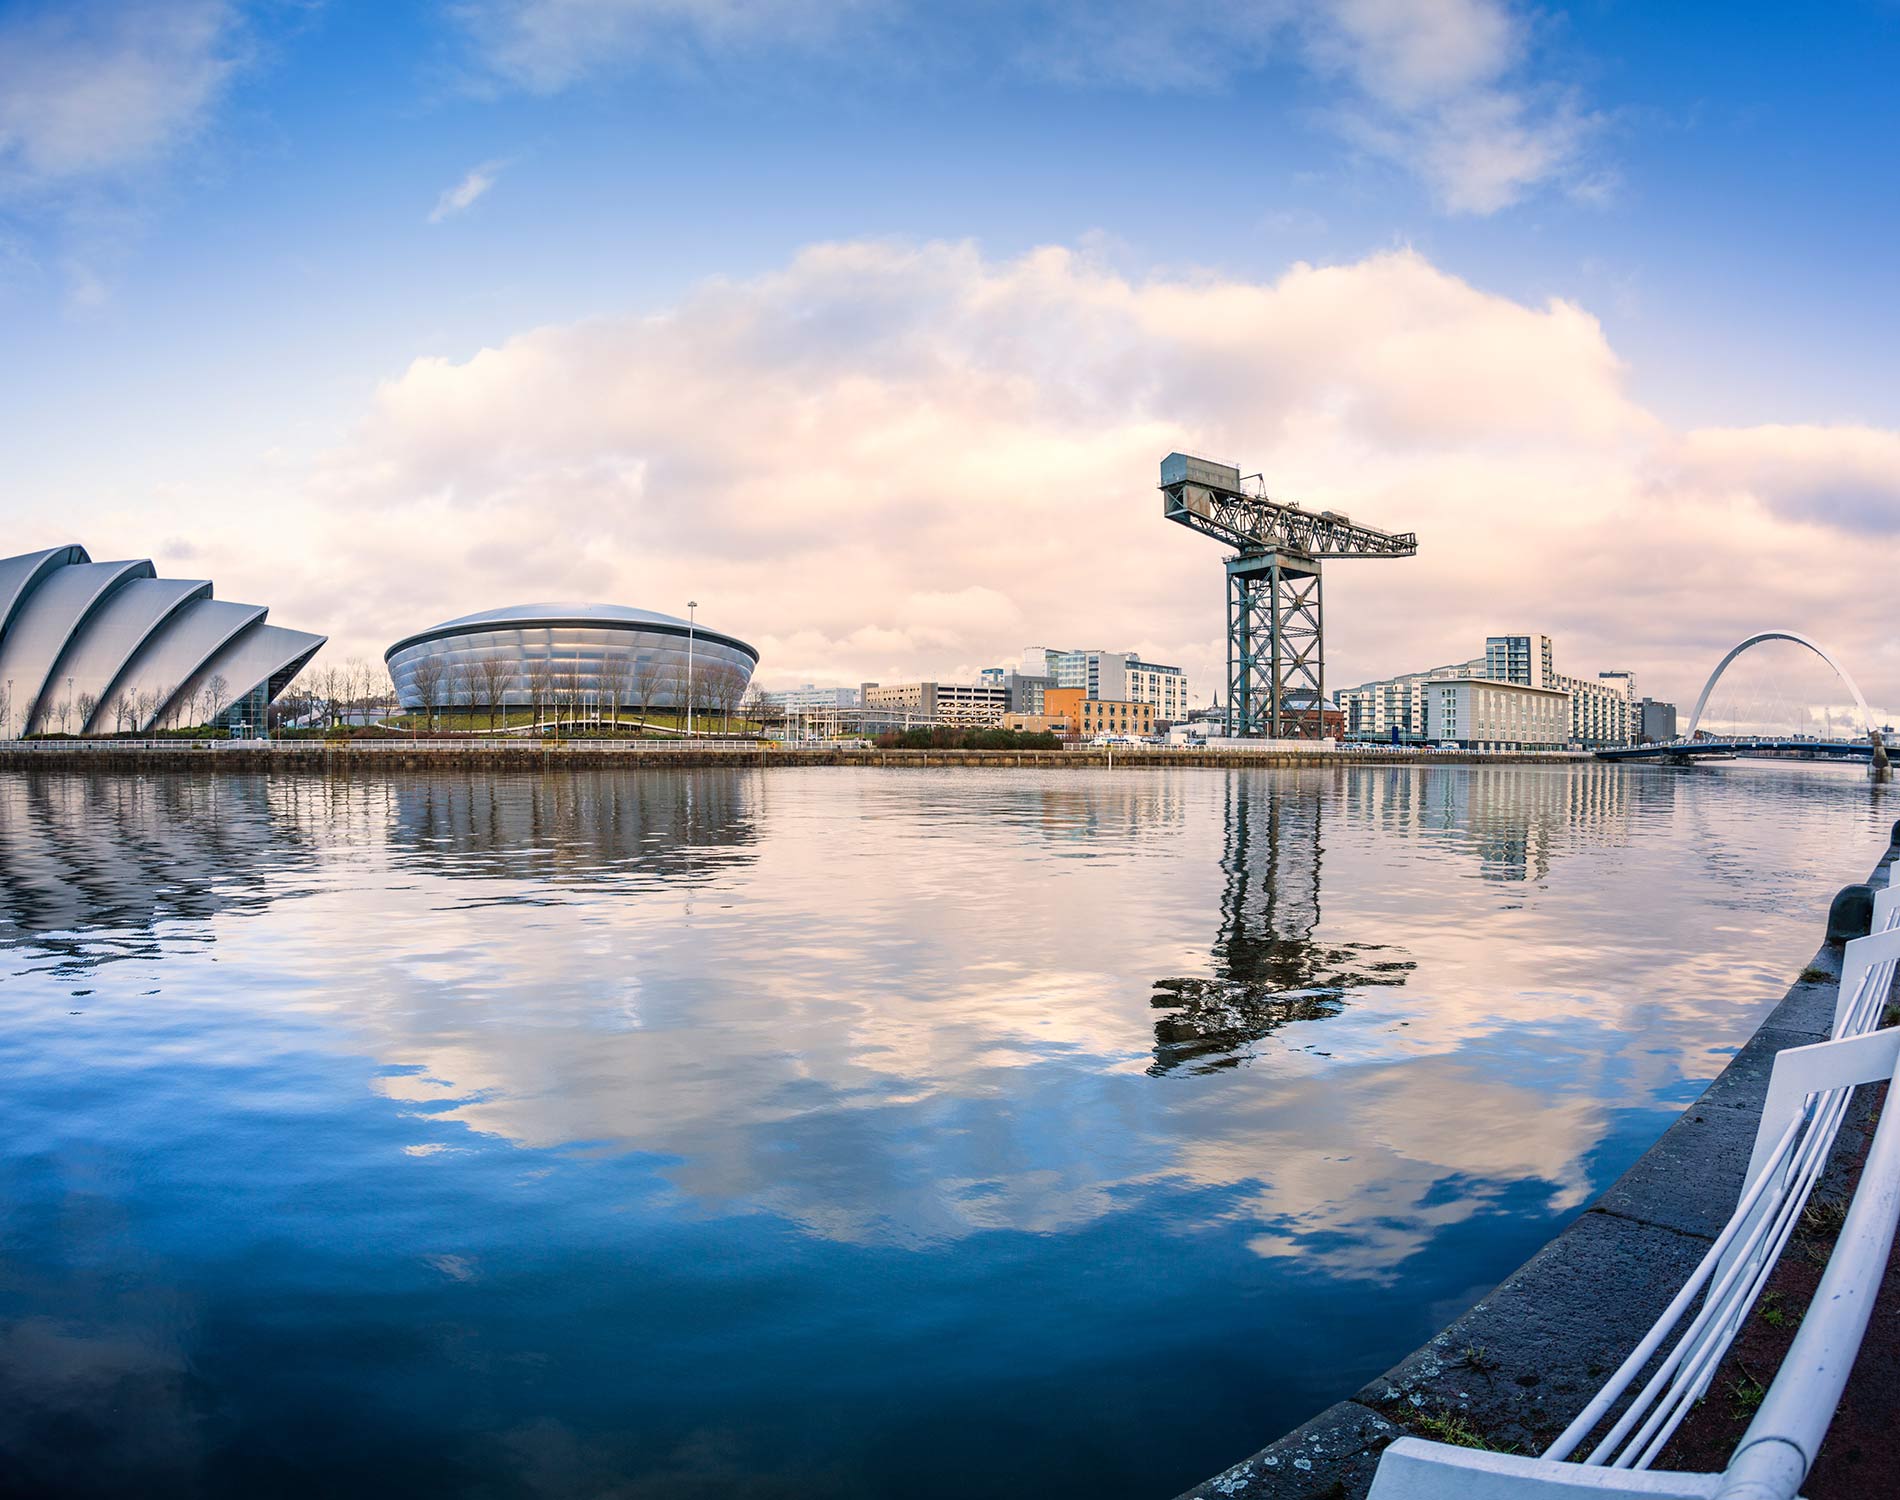 /-/media/images/website/background-images/offices/glasgow/glasgow-the-river-clyde.ashx